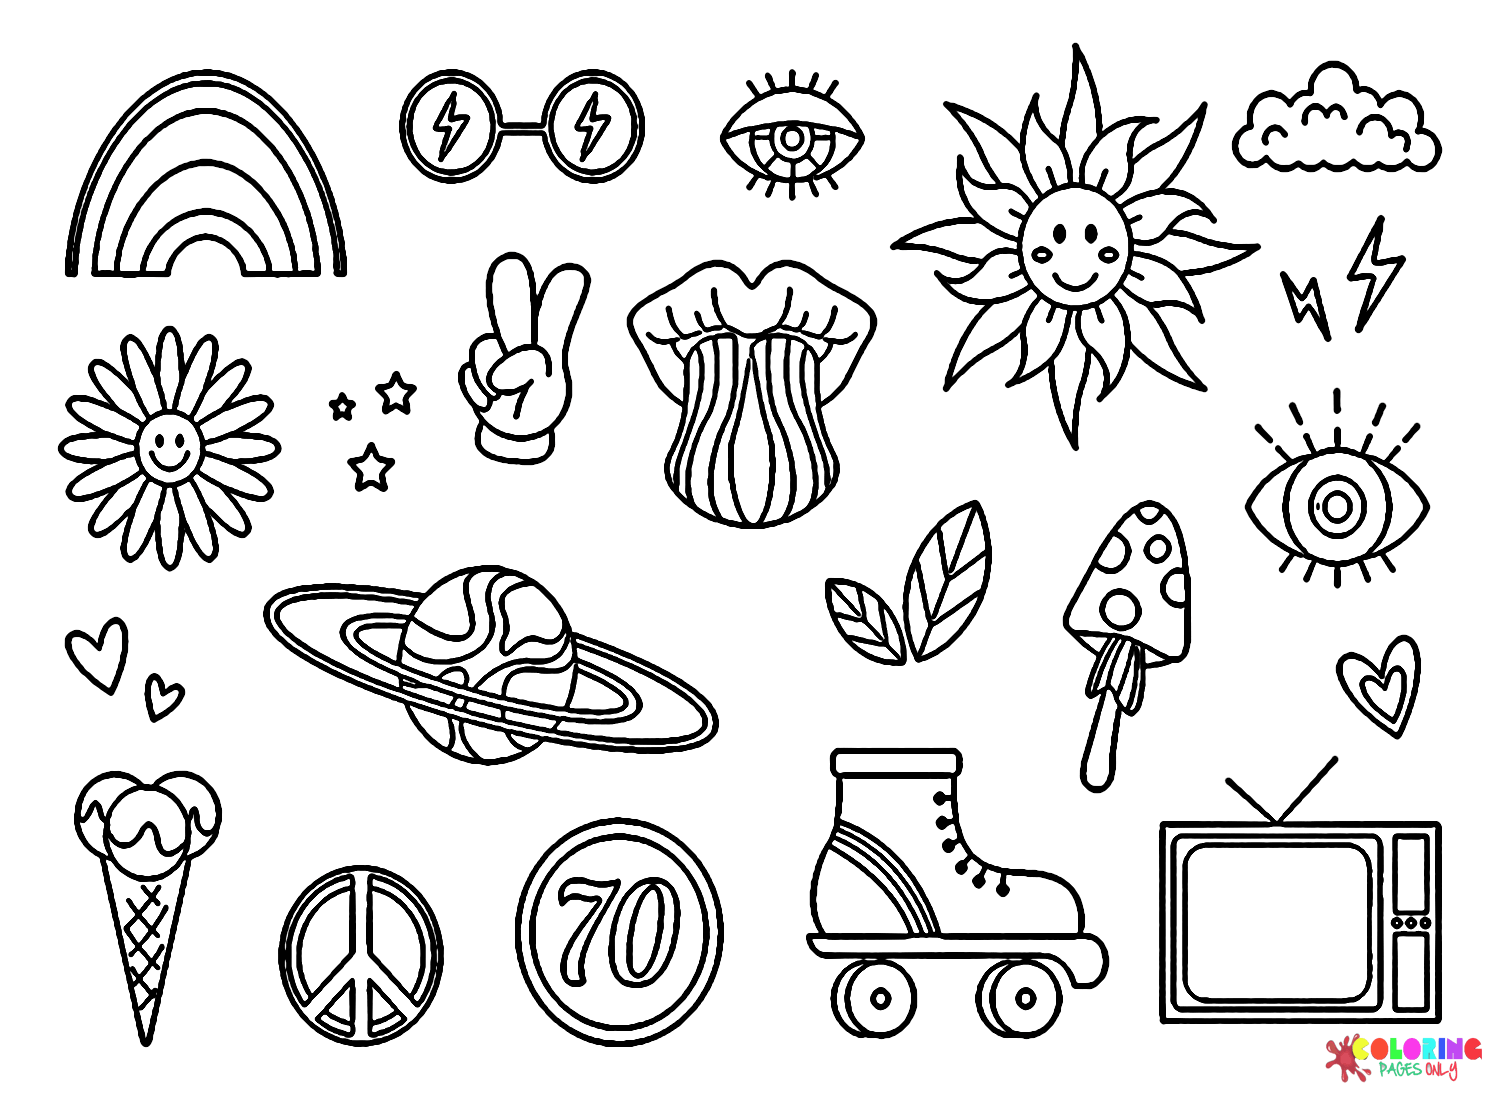 Hippie Coloring Pages - Coloring Pages For Kids And Adults